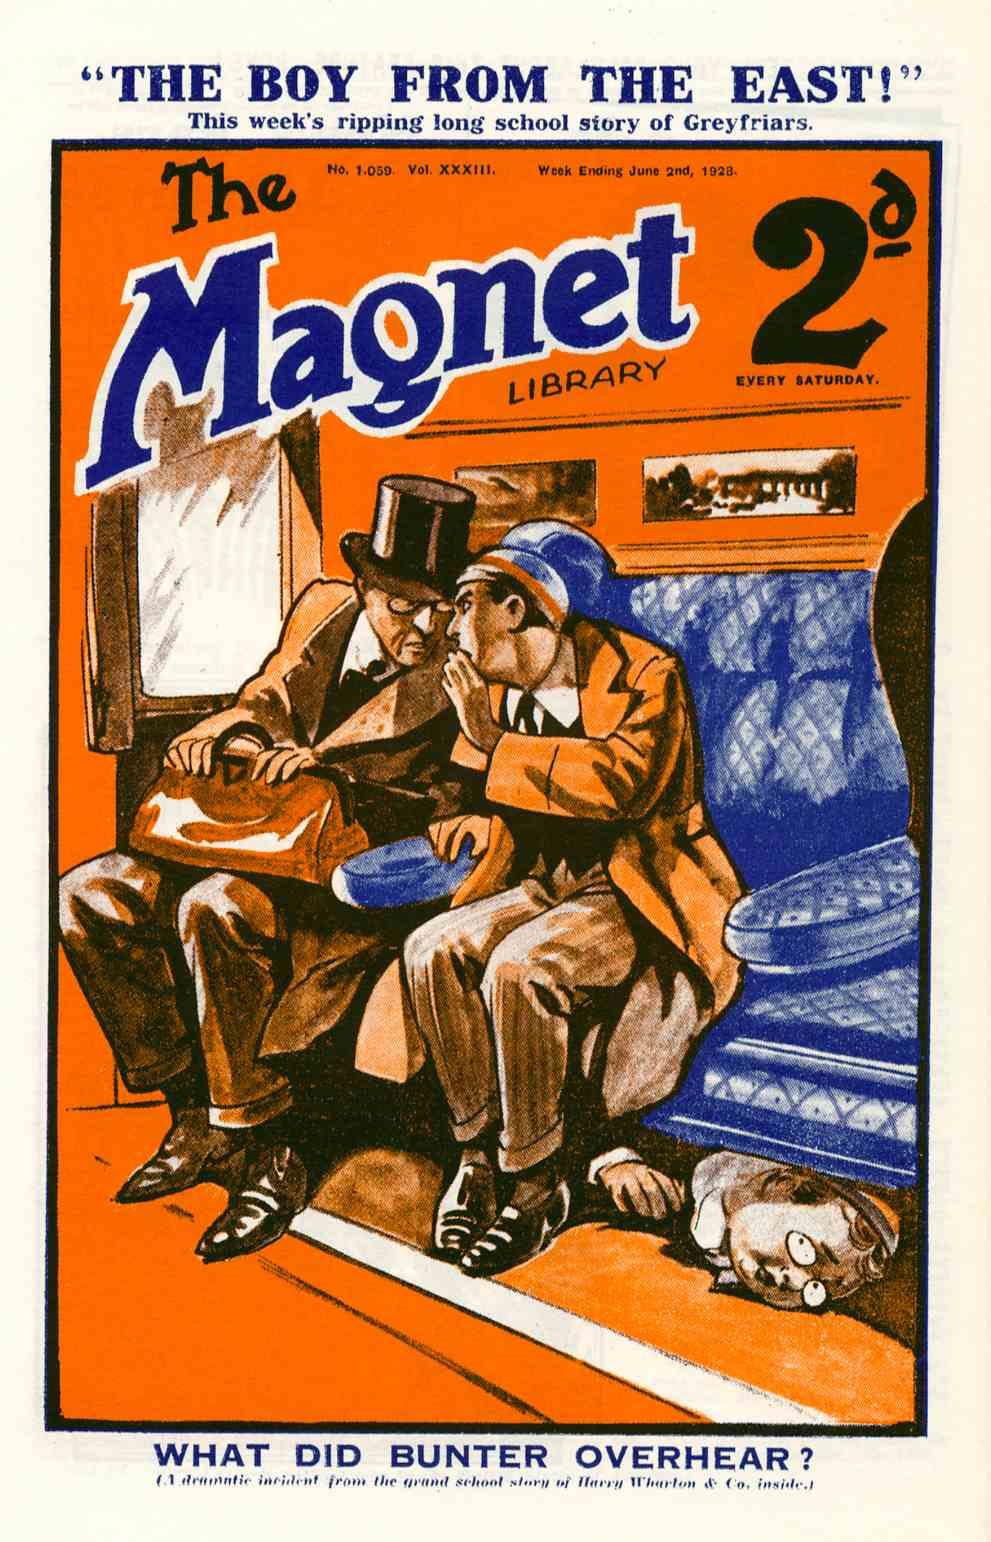 Book Cover For The Magnet 1059 - The Boy from the East!